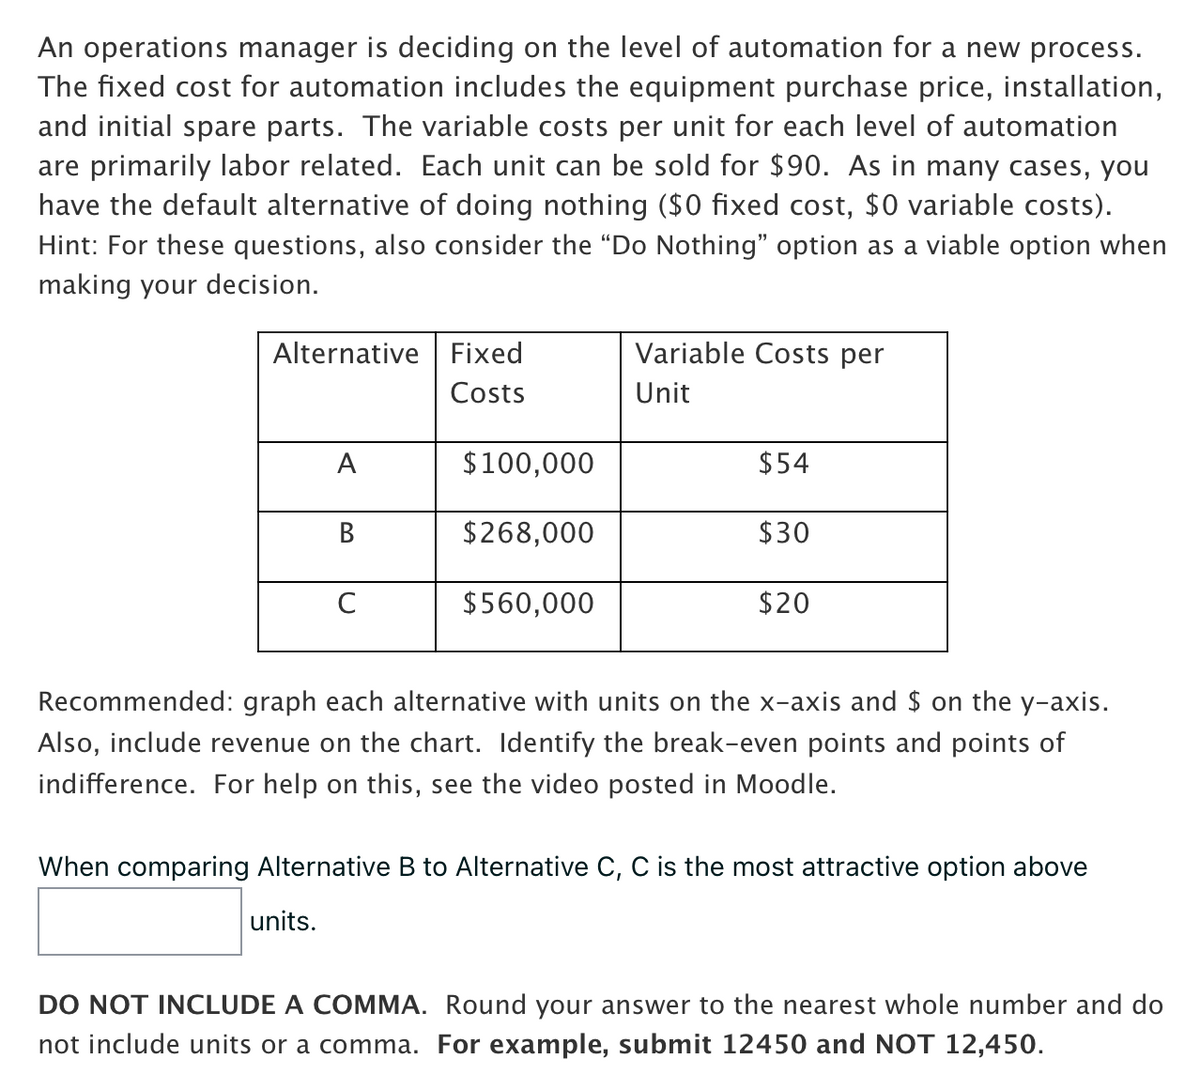 An operations manager is deciding on the level of automation for a new process.
The fixed cost for automation includes the equipment purchase price, installation,
and initial spare parts. The variable costs per unit for each level of automation
are primarily labor related. Each unit can be sold for $90. As in many cases, you
have the default alternative of doing nothing ($0 fixed cost, $0 variable costs).
Hint: For these questions, also consider the "Do Nothing" option as a viable option when
making your decision.
Alternative Fixed
Costs
A
B
C
$100,000
$268,000
$560,000
Variable Costs per
Unit
$54
$30
$20
Recommended: graph each alternative with units on the x-axis and $ on the y-axis.
Also, include revenue on the chart. Identify the break-even points and points of
indifference. For help on this, see the video posted in Moodle.
When comparing Alternative B to Alternative C, C is the most attractive option above
units.
DO NOT INCLUDE A COMMA. Round your answer to the nearest whole number and do
not include units or a comma. For example, submit 12450 and NOT 12,450.